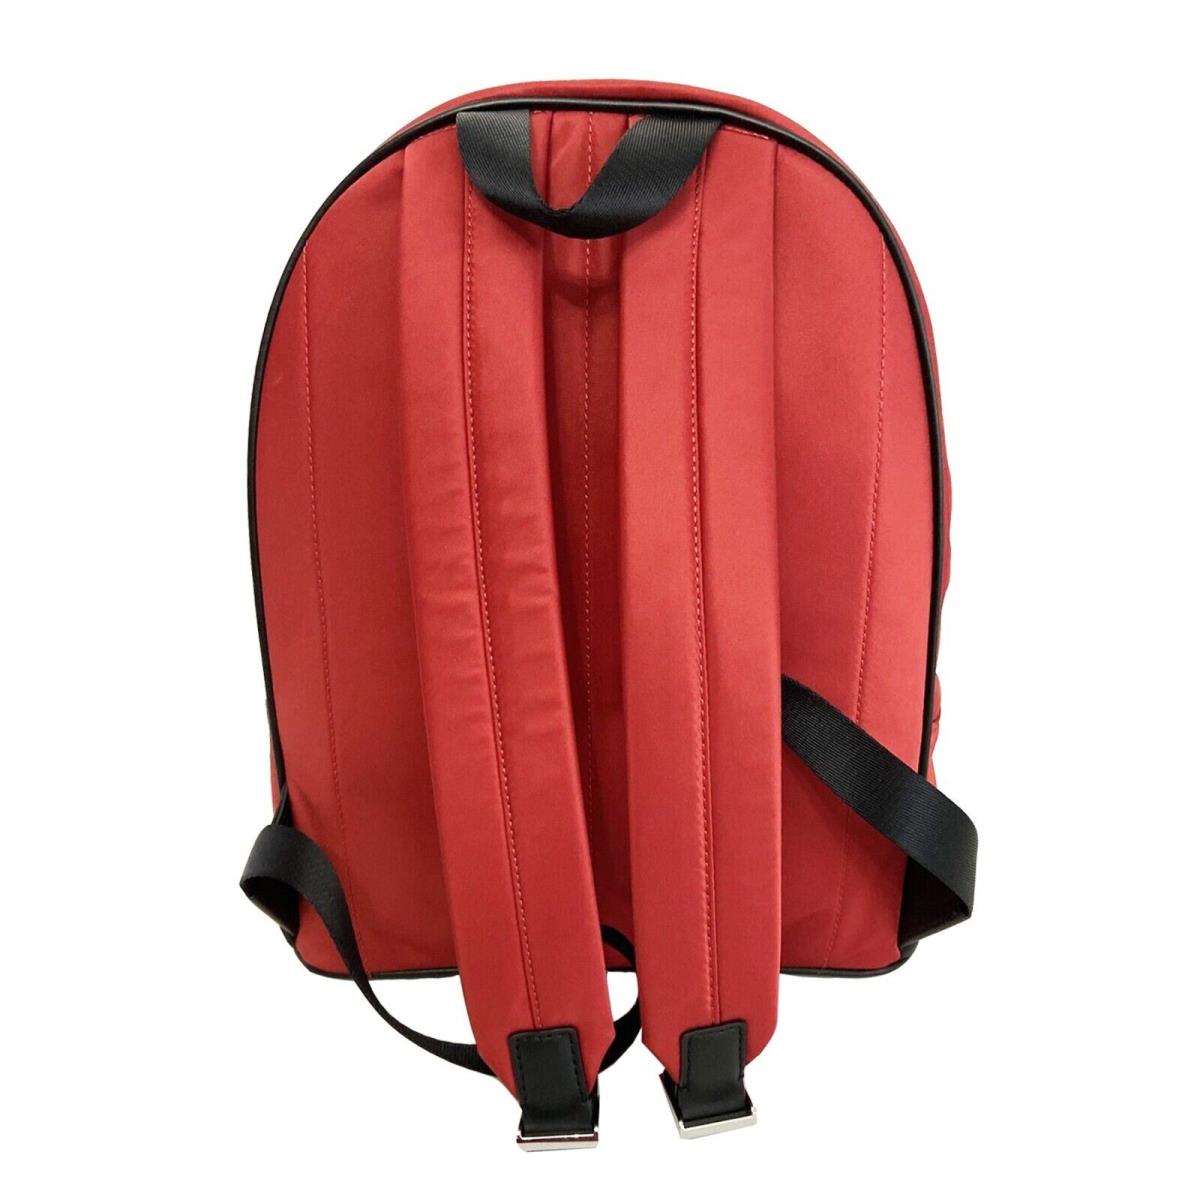 Michael Kors Sport Large Backpack - Flame Red/white - Exterior: RED, Lining: Black, Handle/Strap: Red